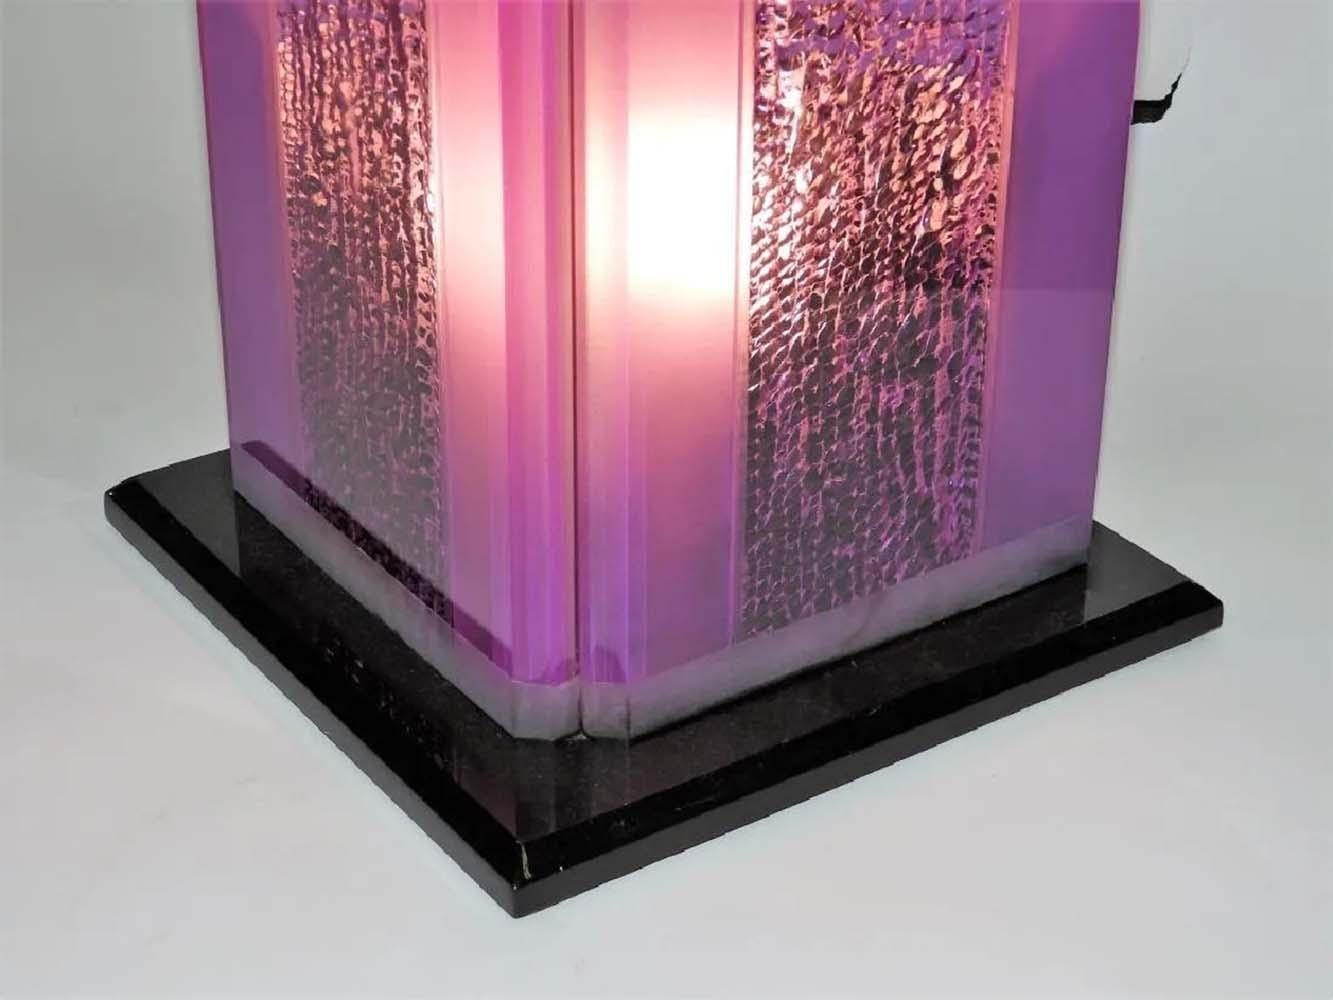 Super cool, colorful and bright, thick purple and black lucite table lamp. Designed by Shlomi Haziza and manufactured by HStudio in Los Angeles circa 1990s. This lamp features a polished exterior surface with a carved or chipped away interior that